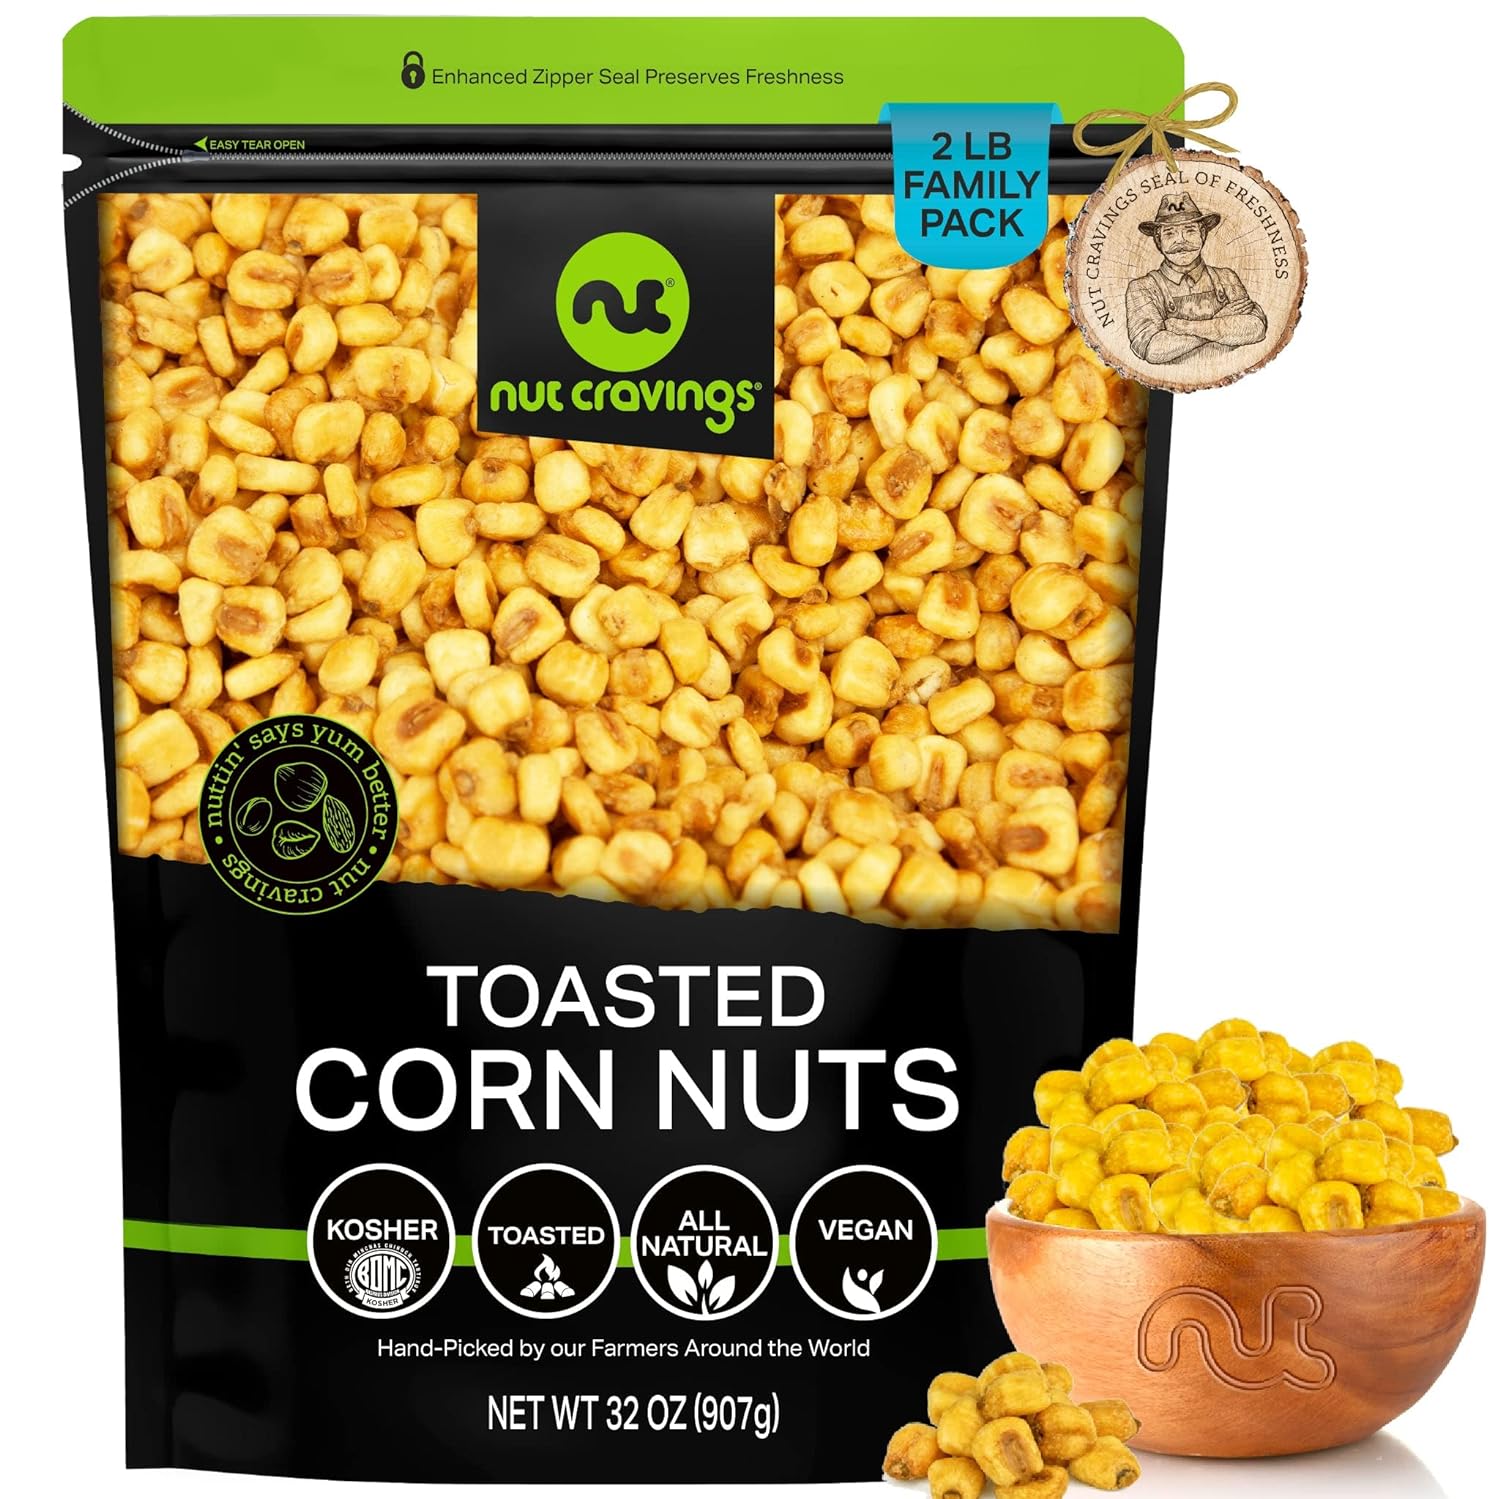 Nut Cravings - Toasted Corn Nuts, Roasted & Salted, Crunchy Kernels - Original Flavor (32oz - 2 LB) Packed Fresh in Resealable Bag - Healthy Snack, Protein Food, All Natural, Vegan, Kosher